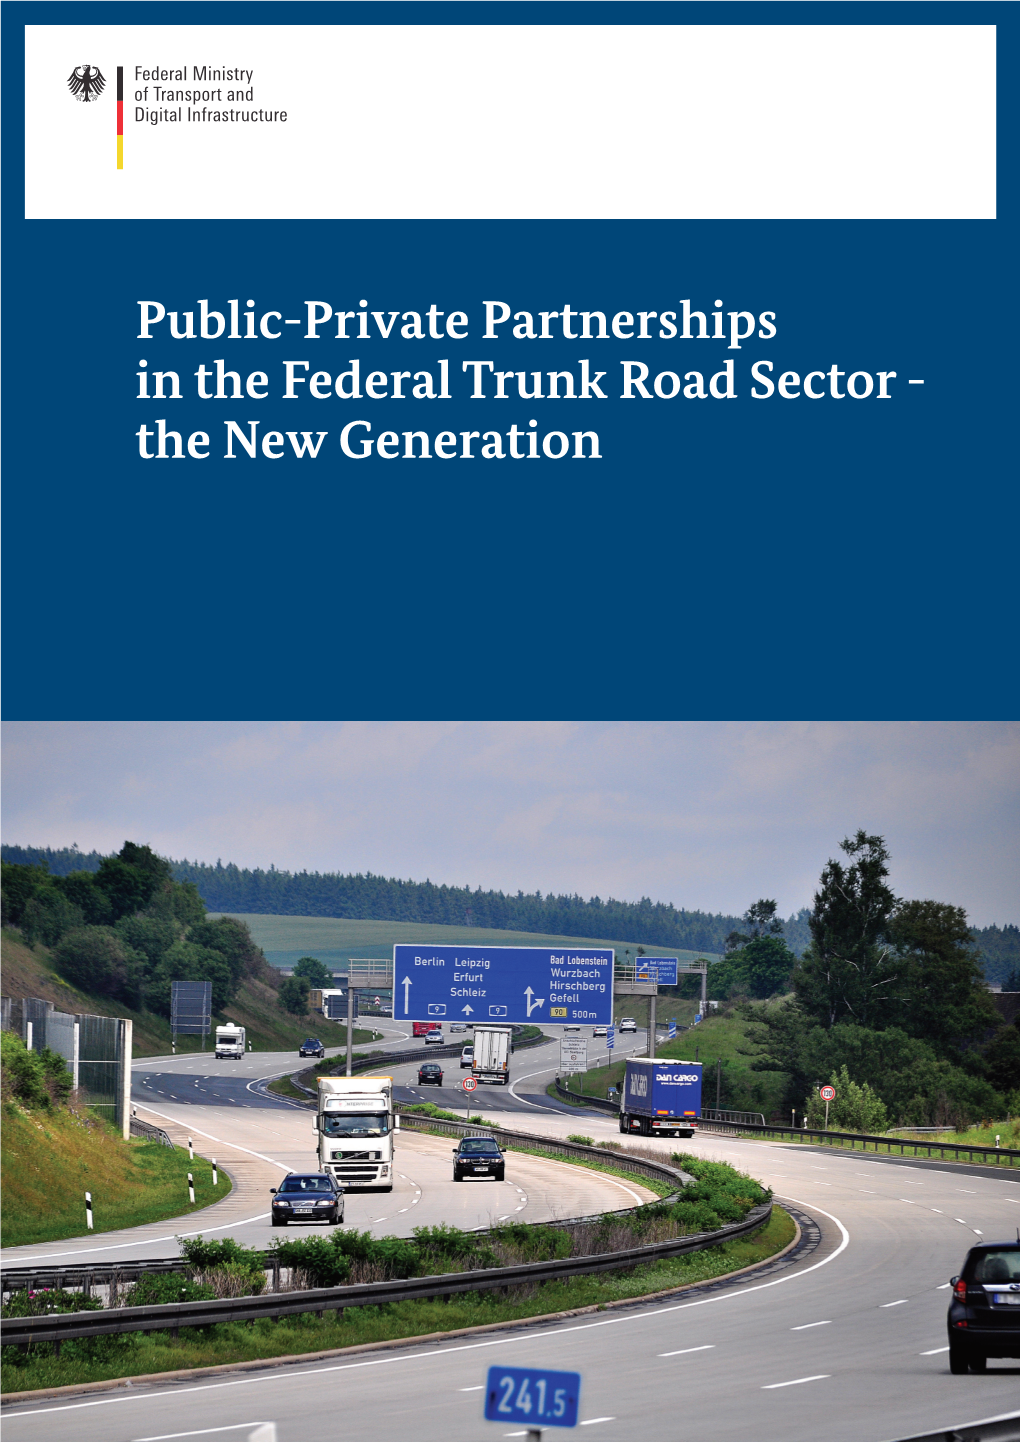 Public-Private Partnerships in the Federal Trunk Road Sector - the New Generation